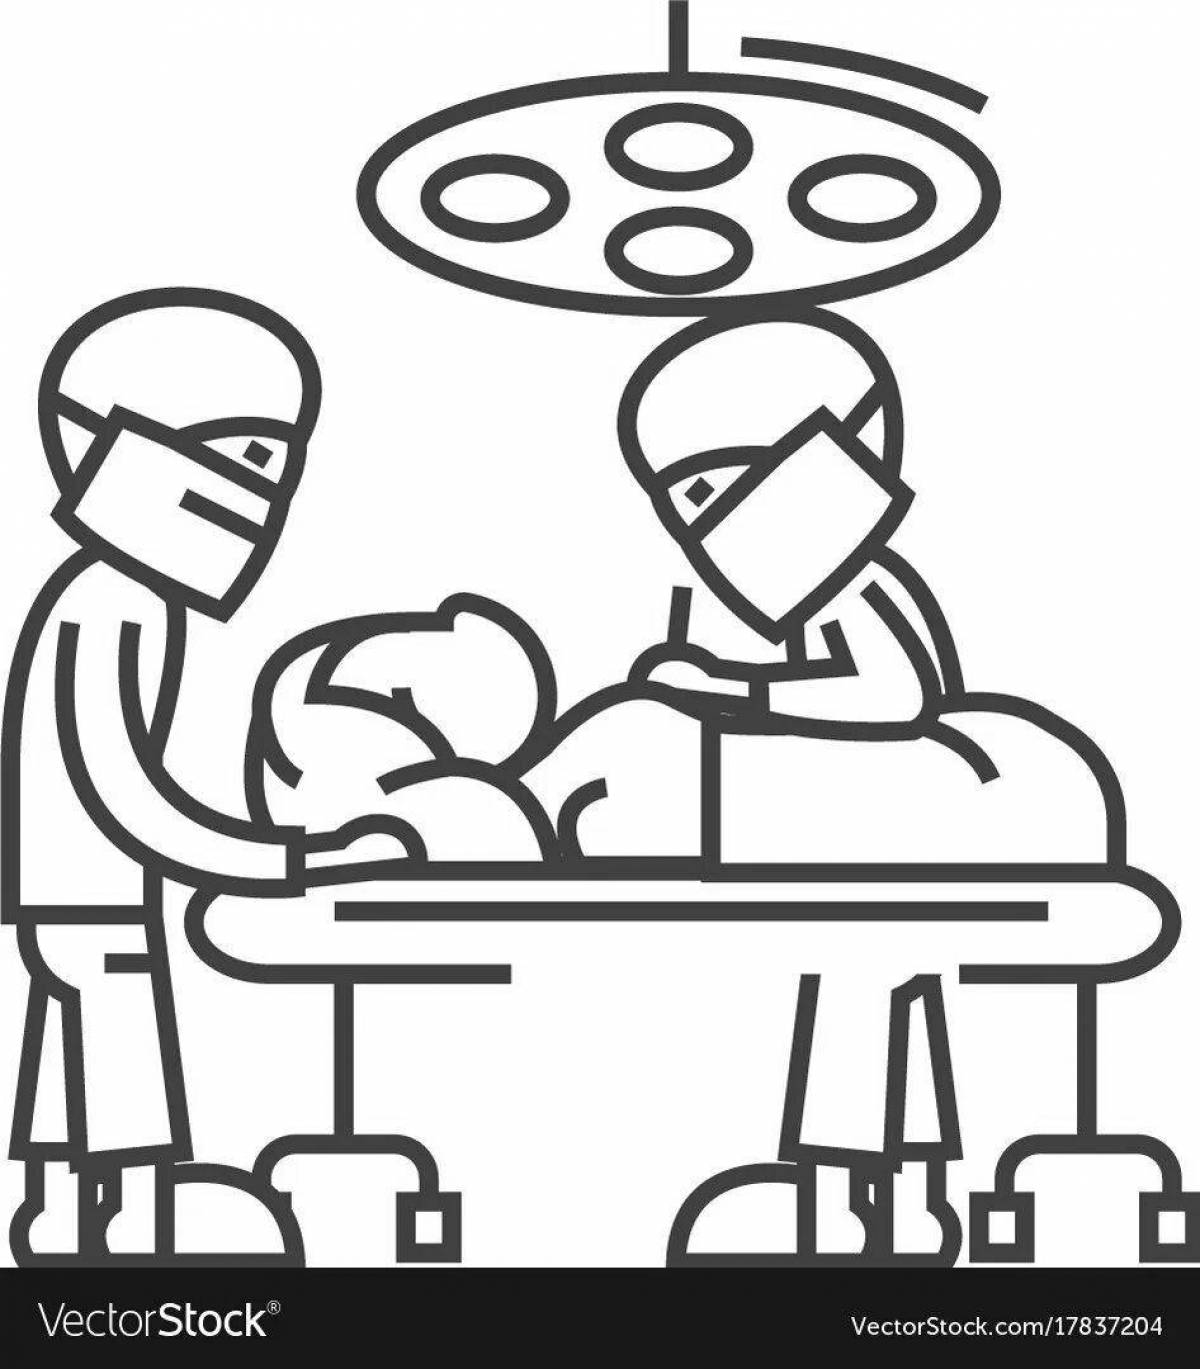 Animated surgery coloring page